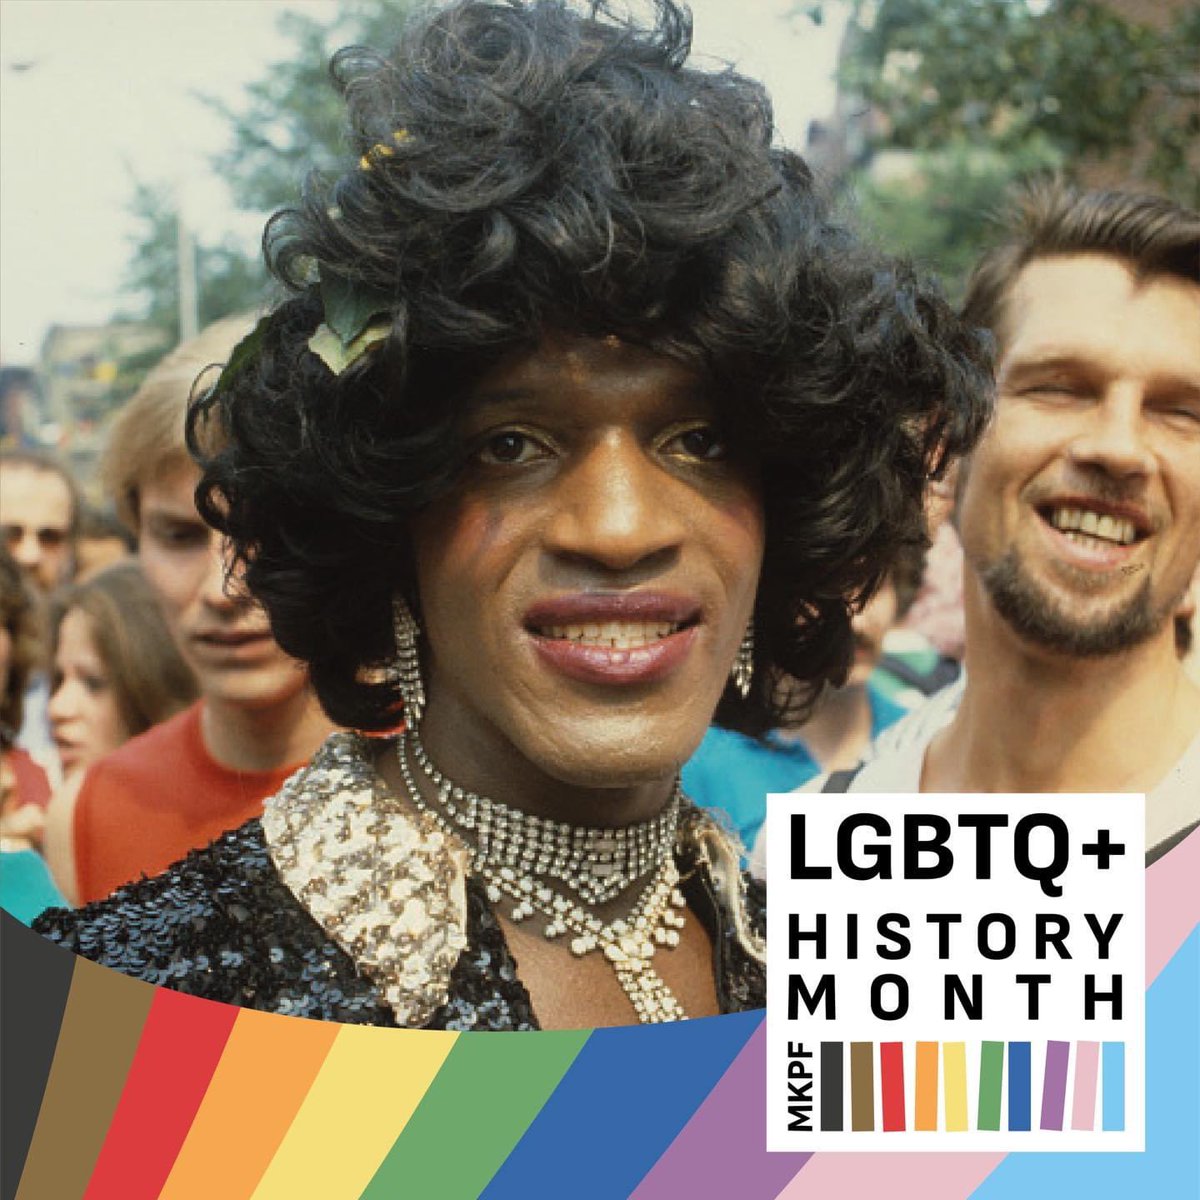 • MARSHA P JOHNSON •

Marsha P Johnson is credited by many for starting the Stonewall Riots when she threw a shot glass at a police officer and shouted 'I got my civil rights'. 

#LGBTQHistoryMonth